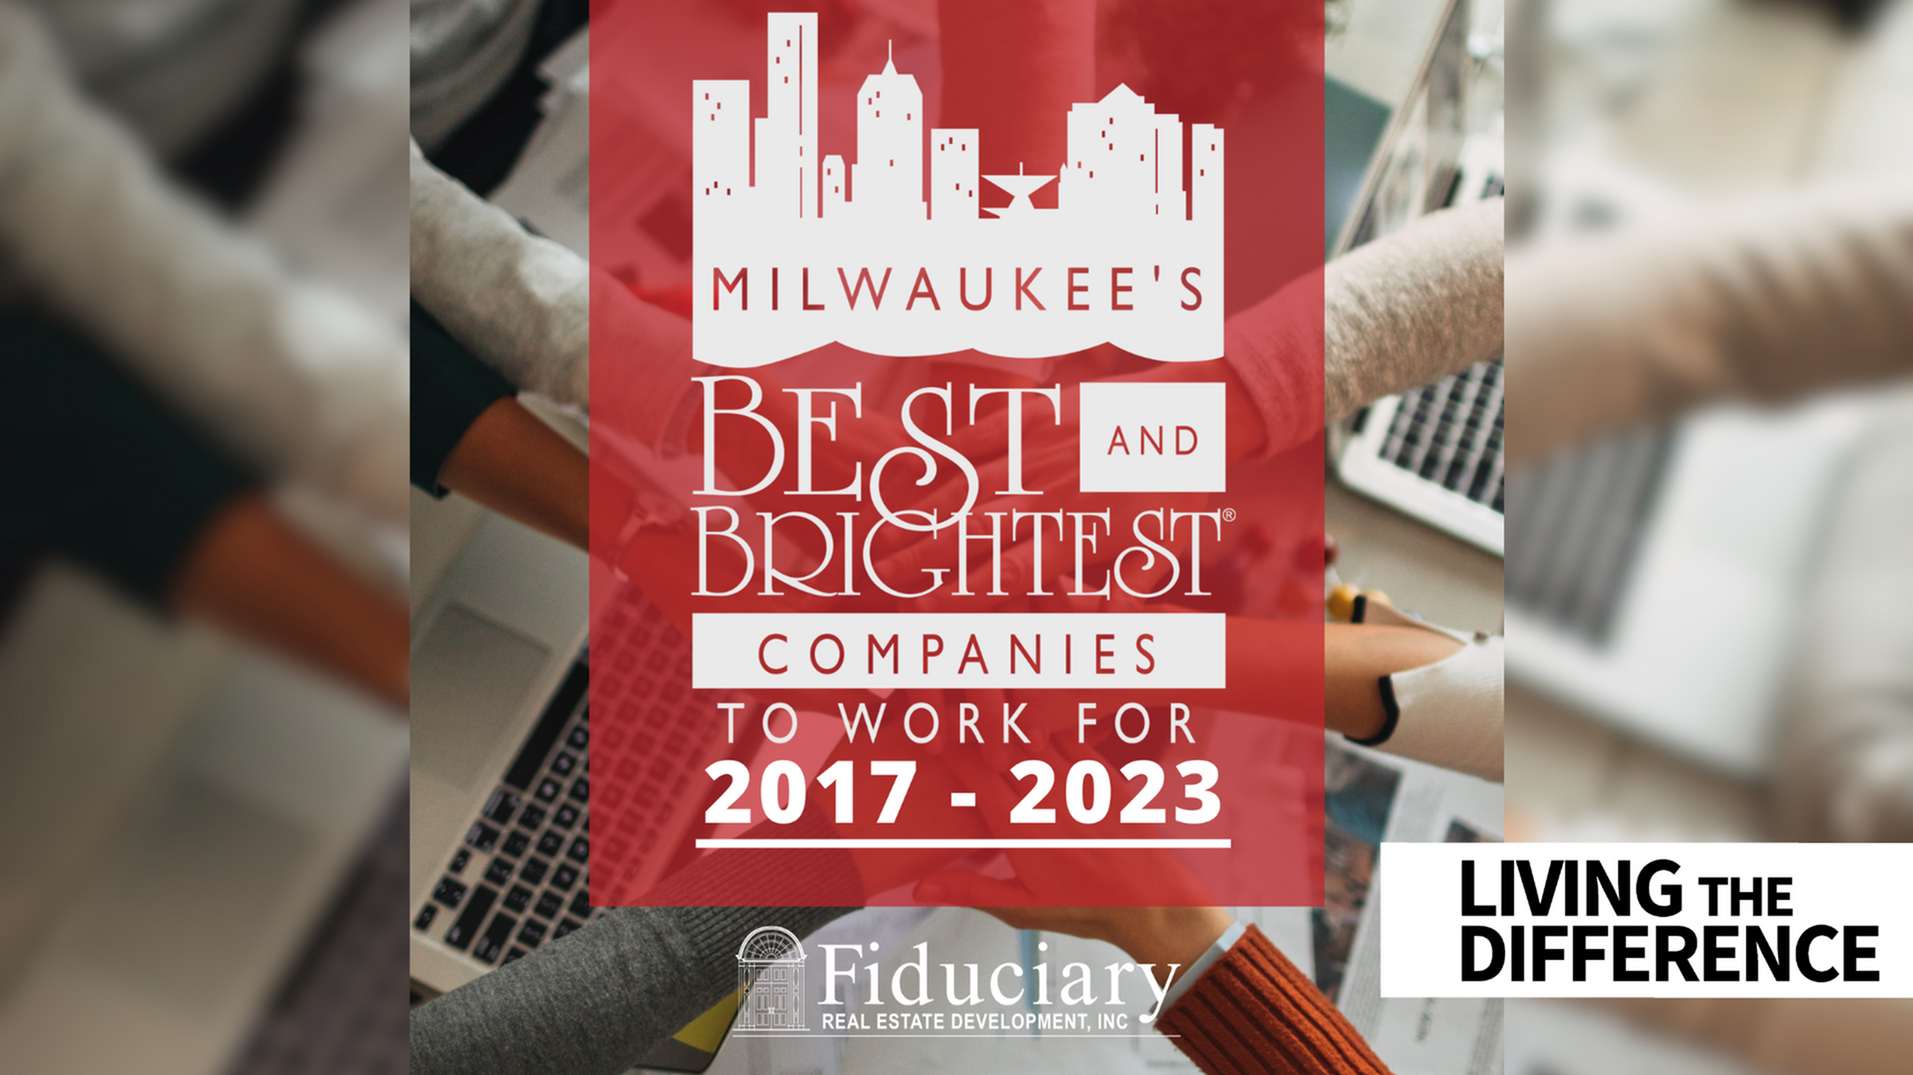 FRED Named Milwaukee’s Best and Brightest Companies to Work For-image